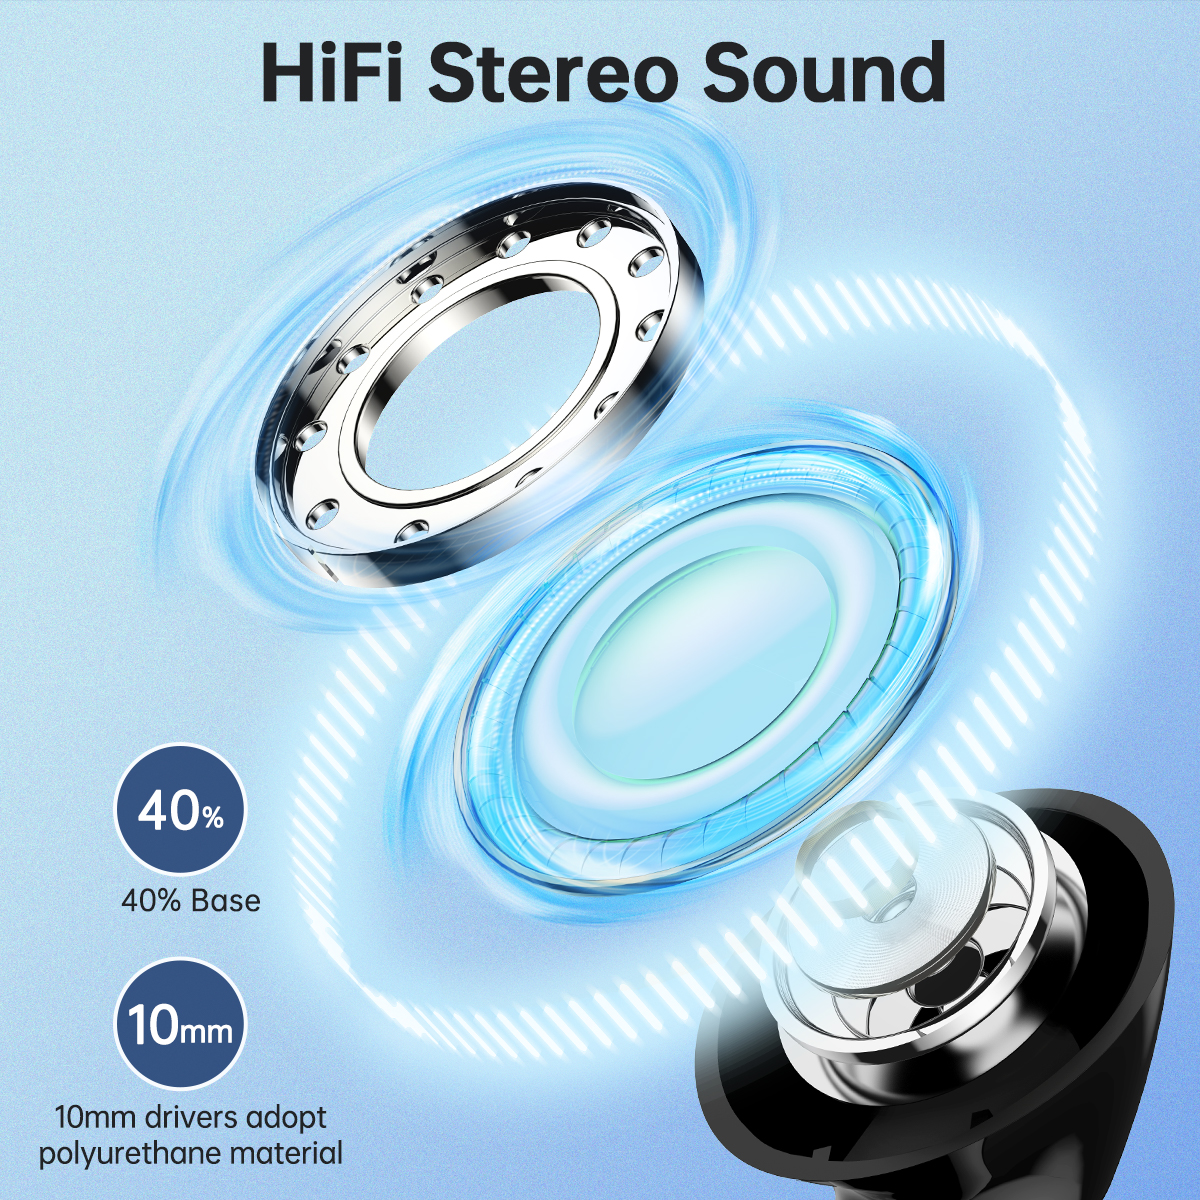 Wireless Earbuds, Bluetooth 5.1 Headphones 30Hrs Playtime with LED Power Display, IPX7 Waterproof Earphones, One-Step Pairing, TWS in Ear Stereo Headset Built-in Mic for iPhone/Android (Black) - image 4 of 7